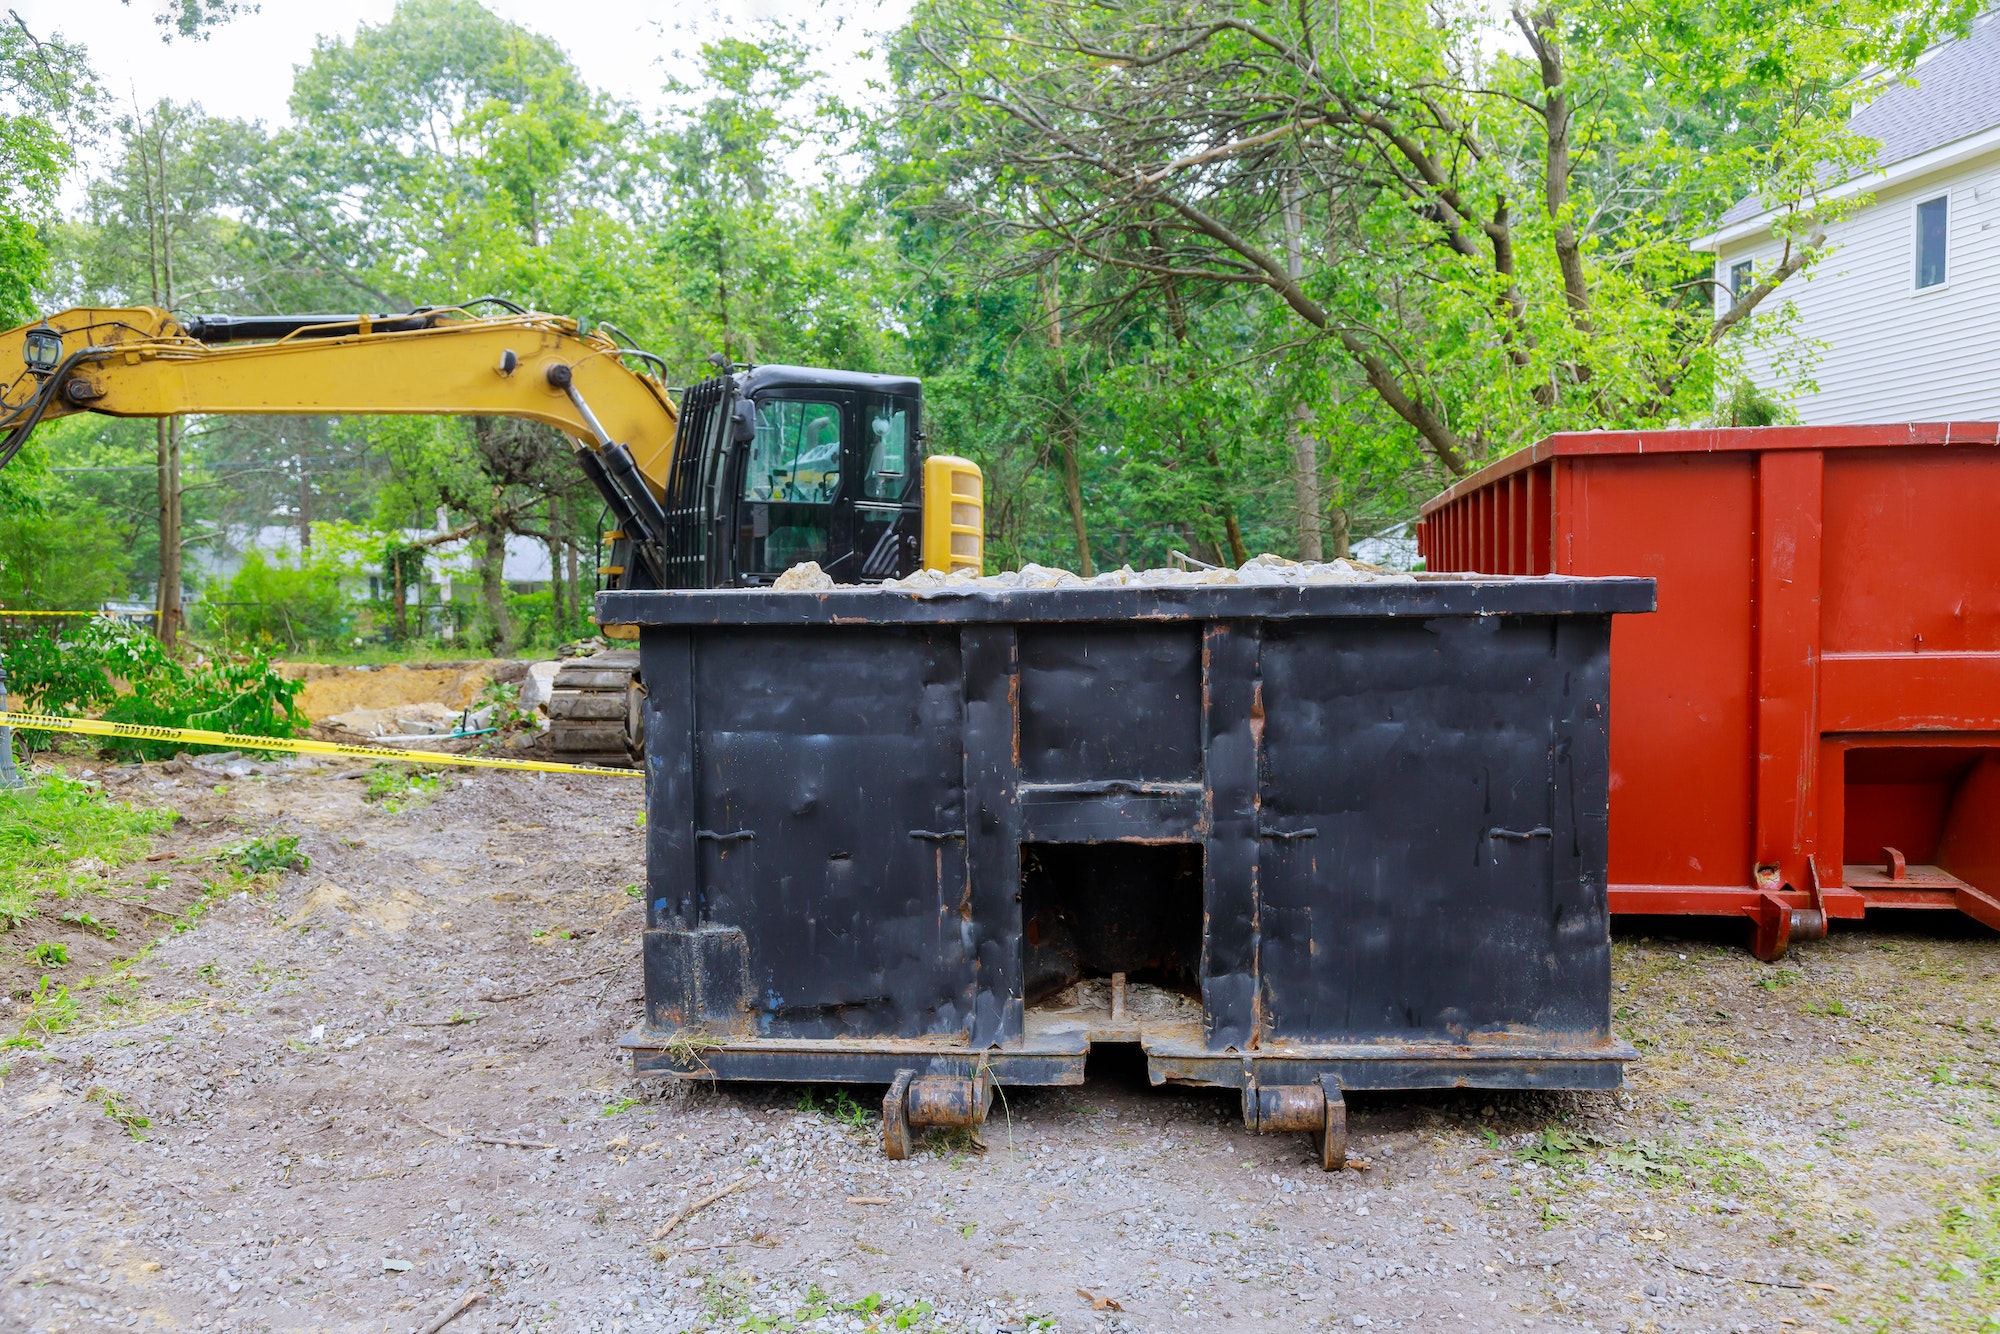 Industrial dumpster filled loaded rubbish removal container renovation building on house under